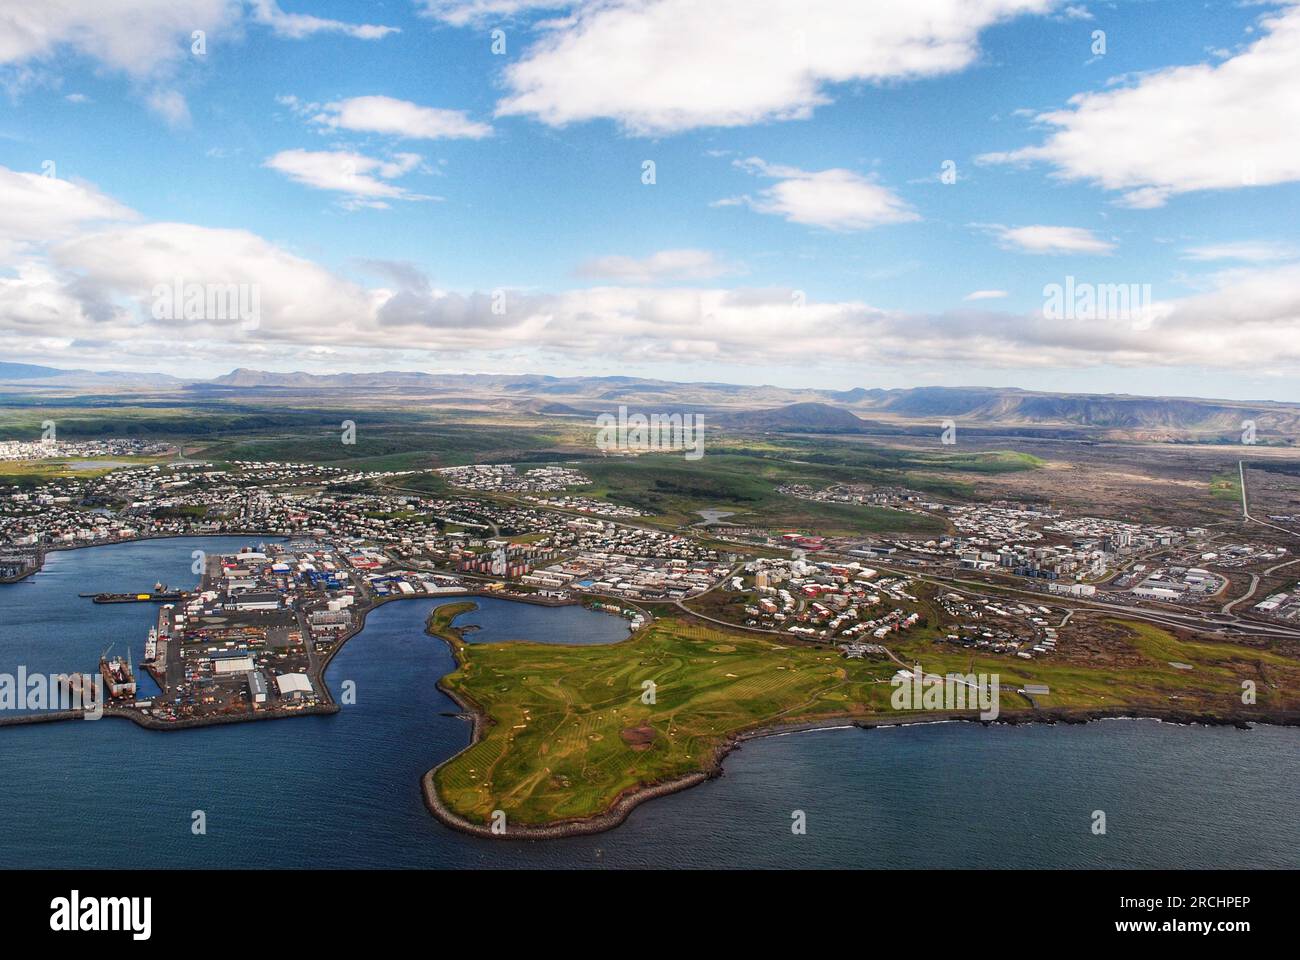 An aerial view of Reykjavik, Iceland. Stock Photo